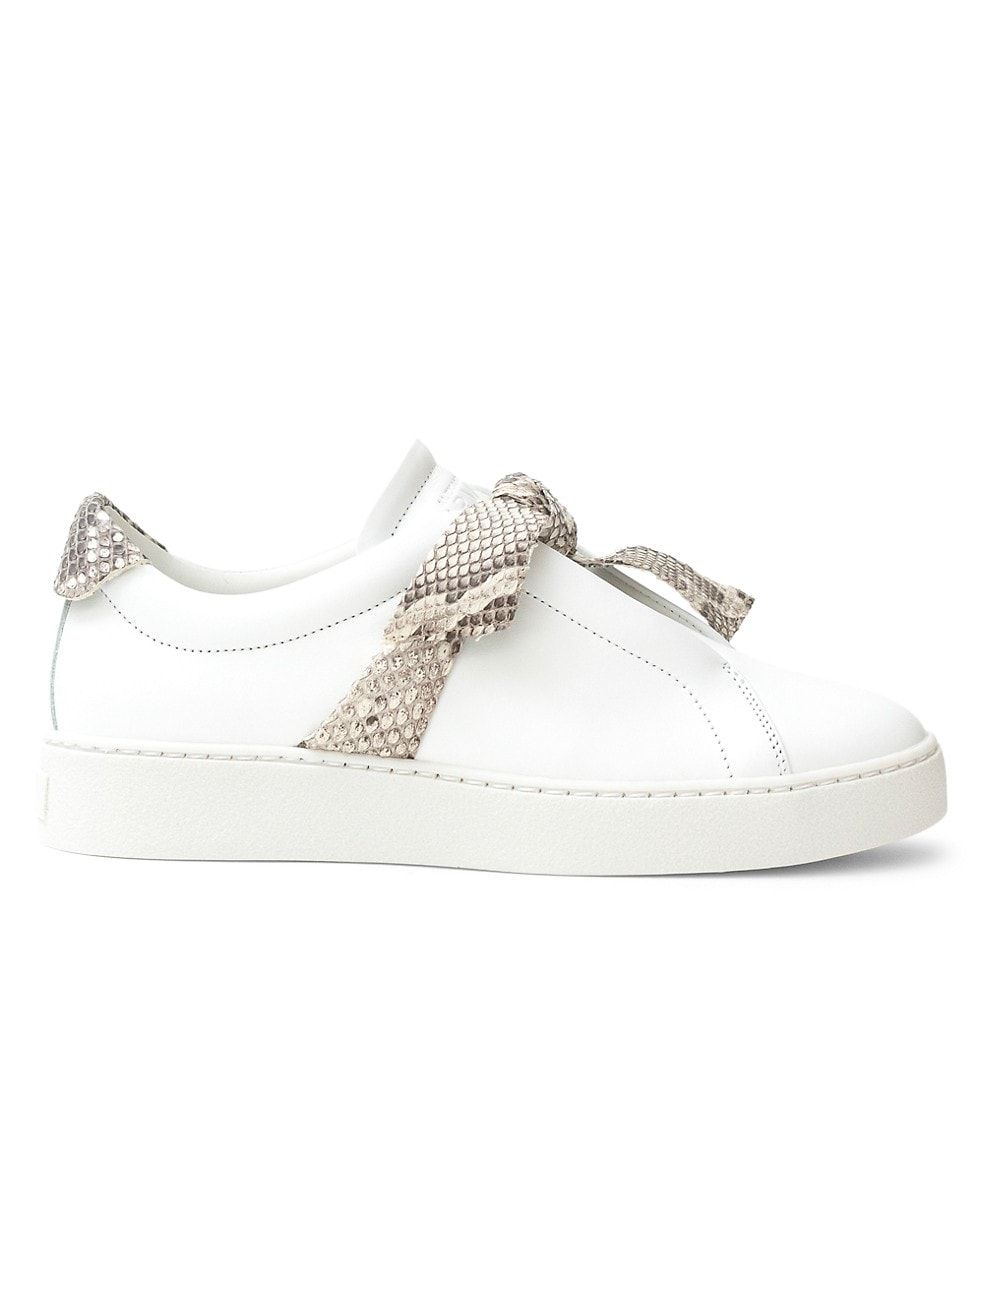 Clarita Python Bow Leather Sneakers | Saks Fifth Avenue